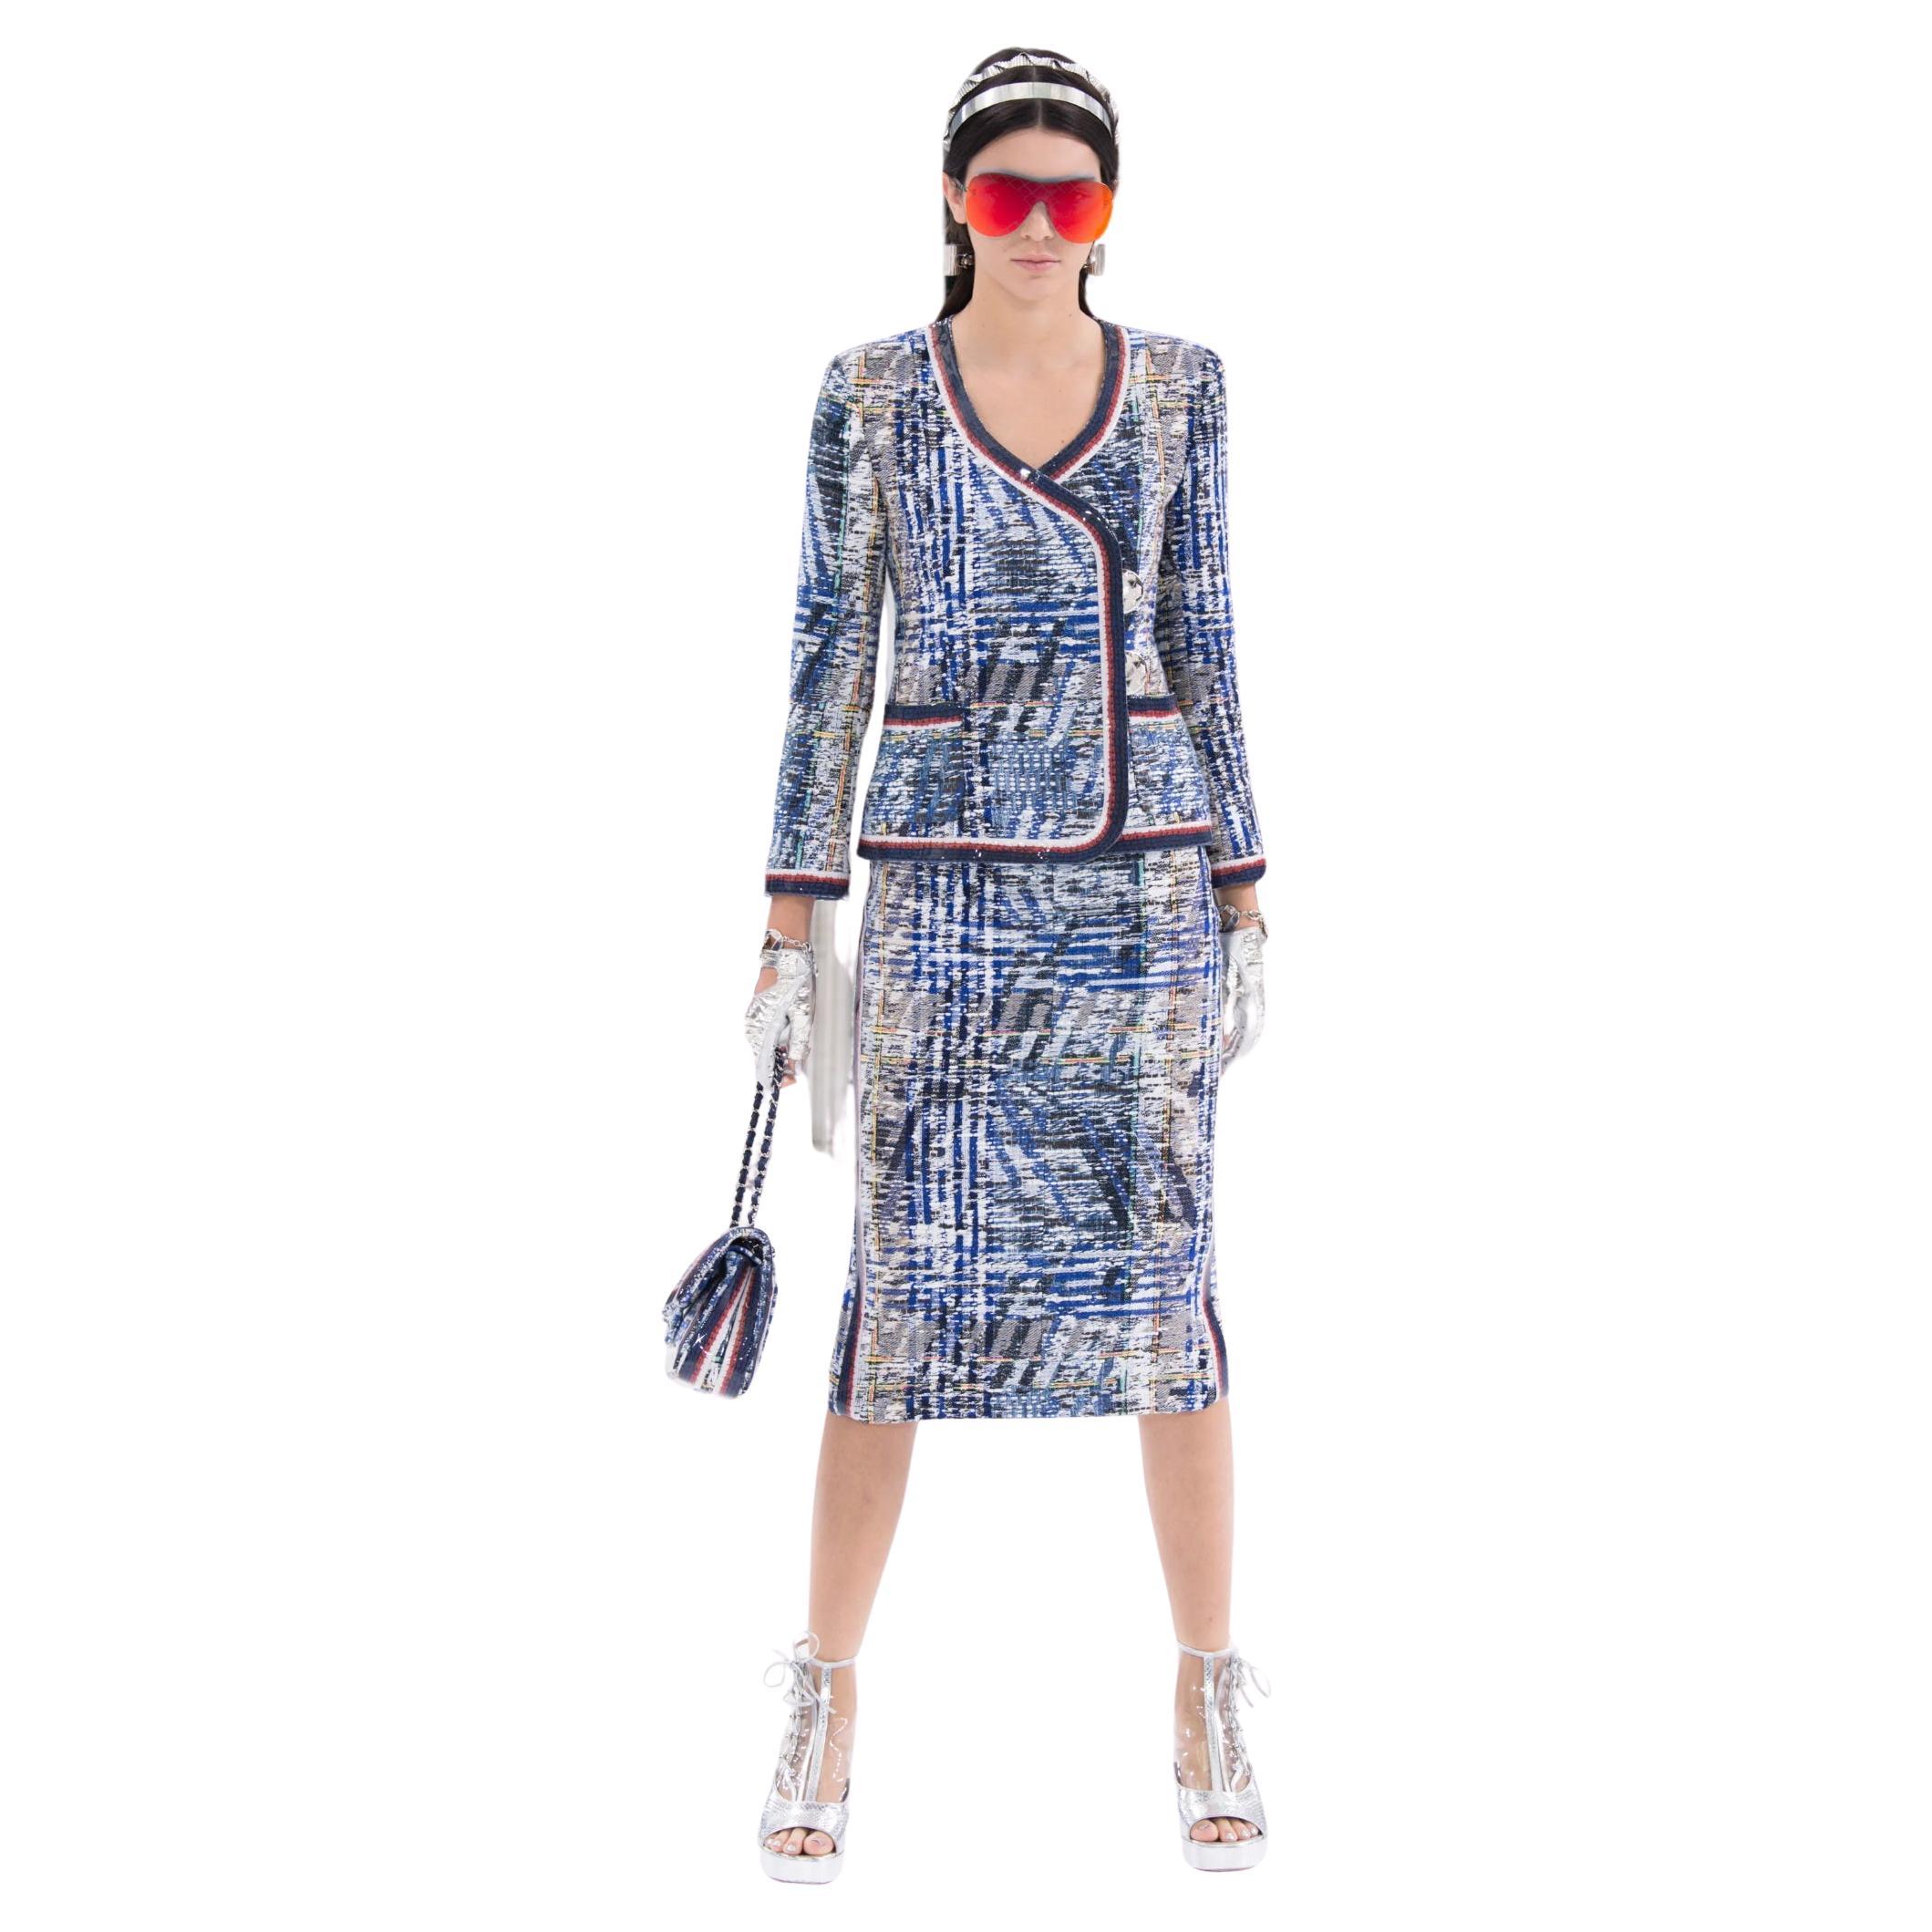 New W/ Tags Chanel Spring 2016 Kendall Jenner "Airport Runway Show" Combinaison jupe  en vente